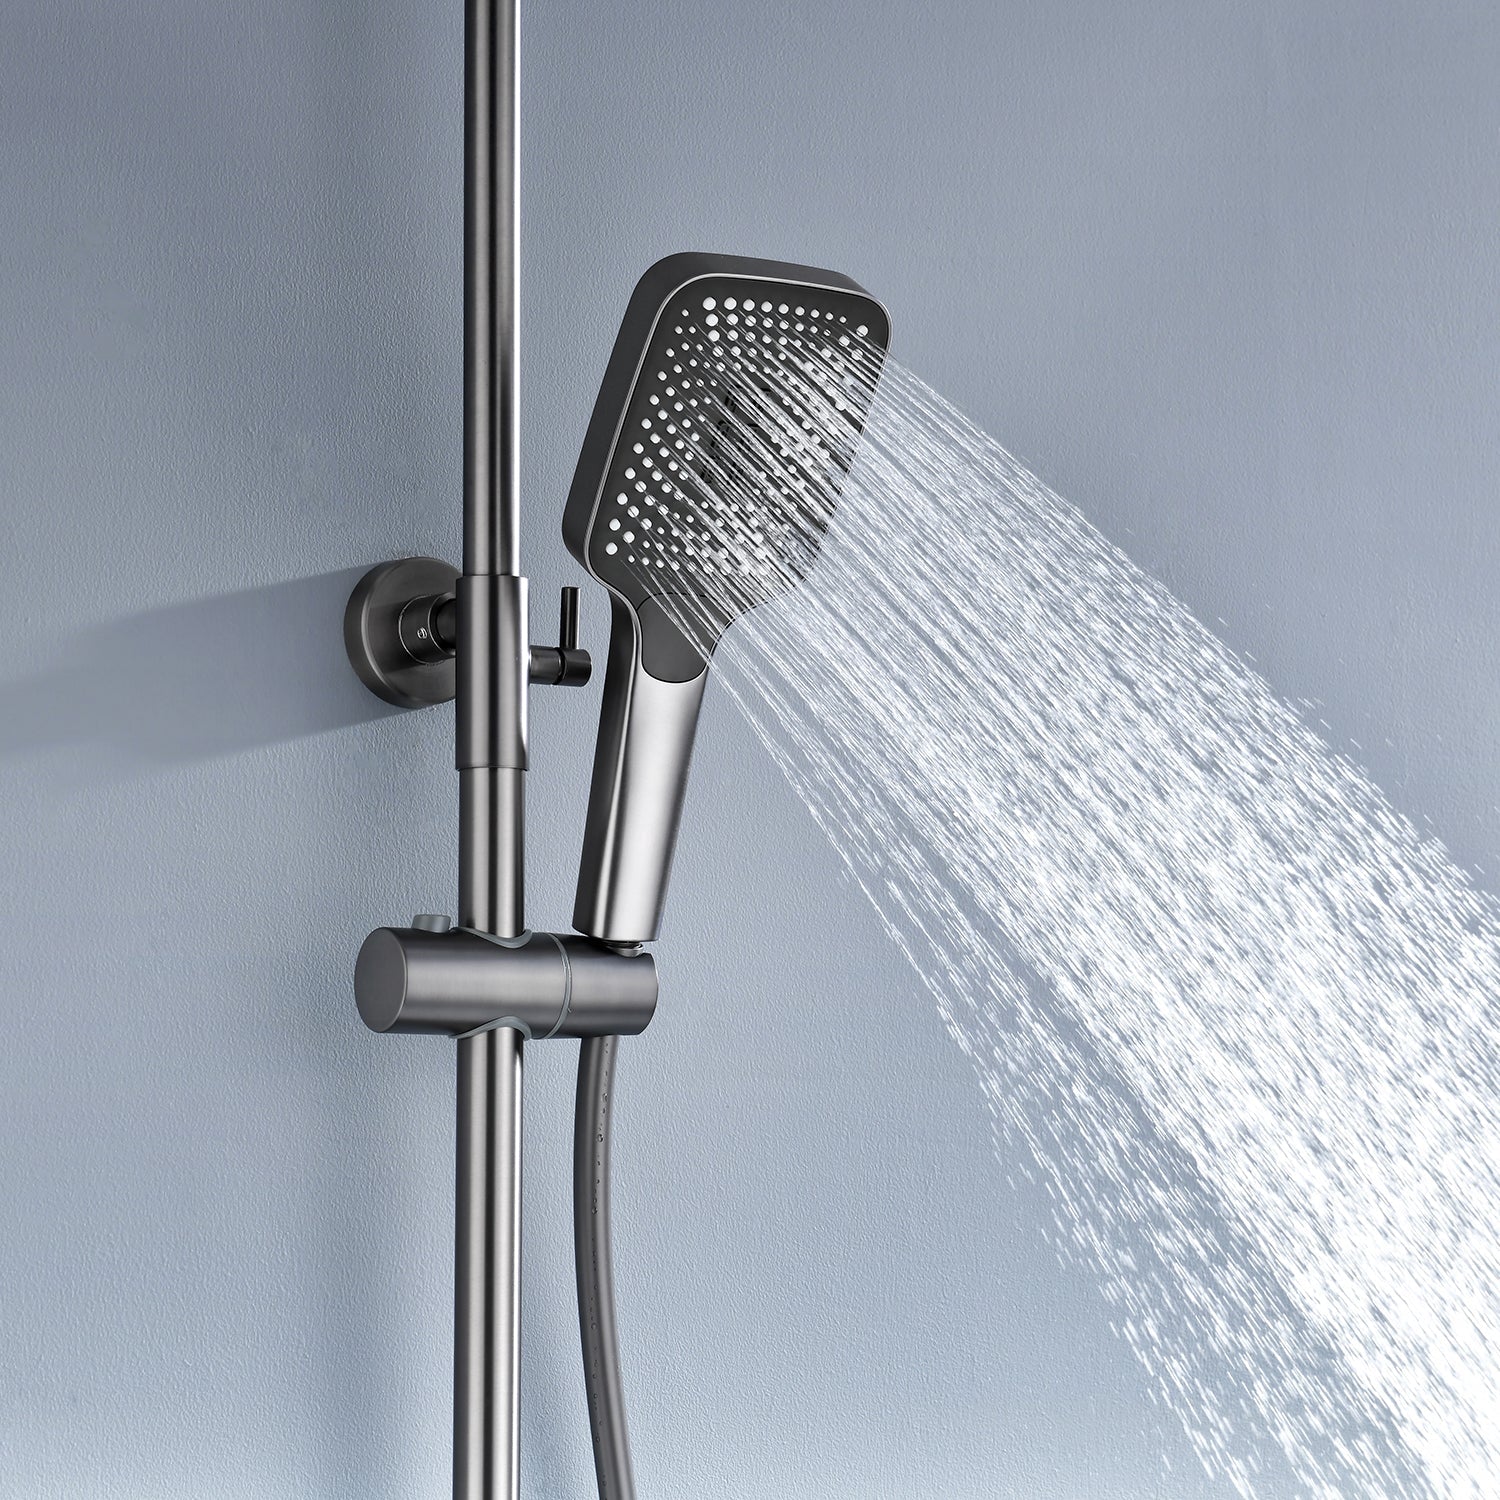 Lefton Thermostatic Shower System With Temperature Display And 4 Water Outlet Modes (Batteries-free) SST2206 -Shower Systems- Lefton Home